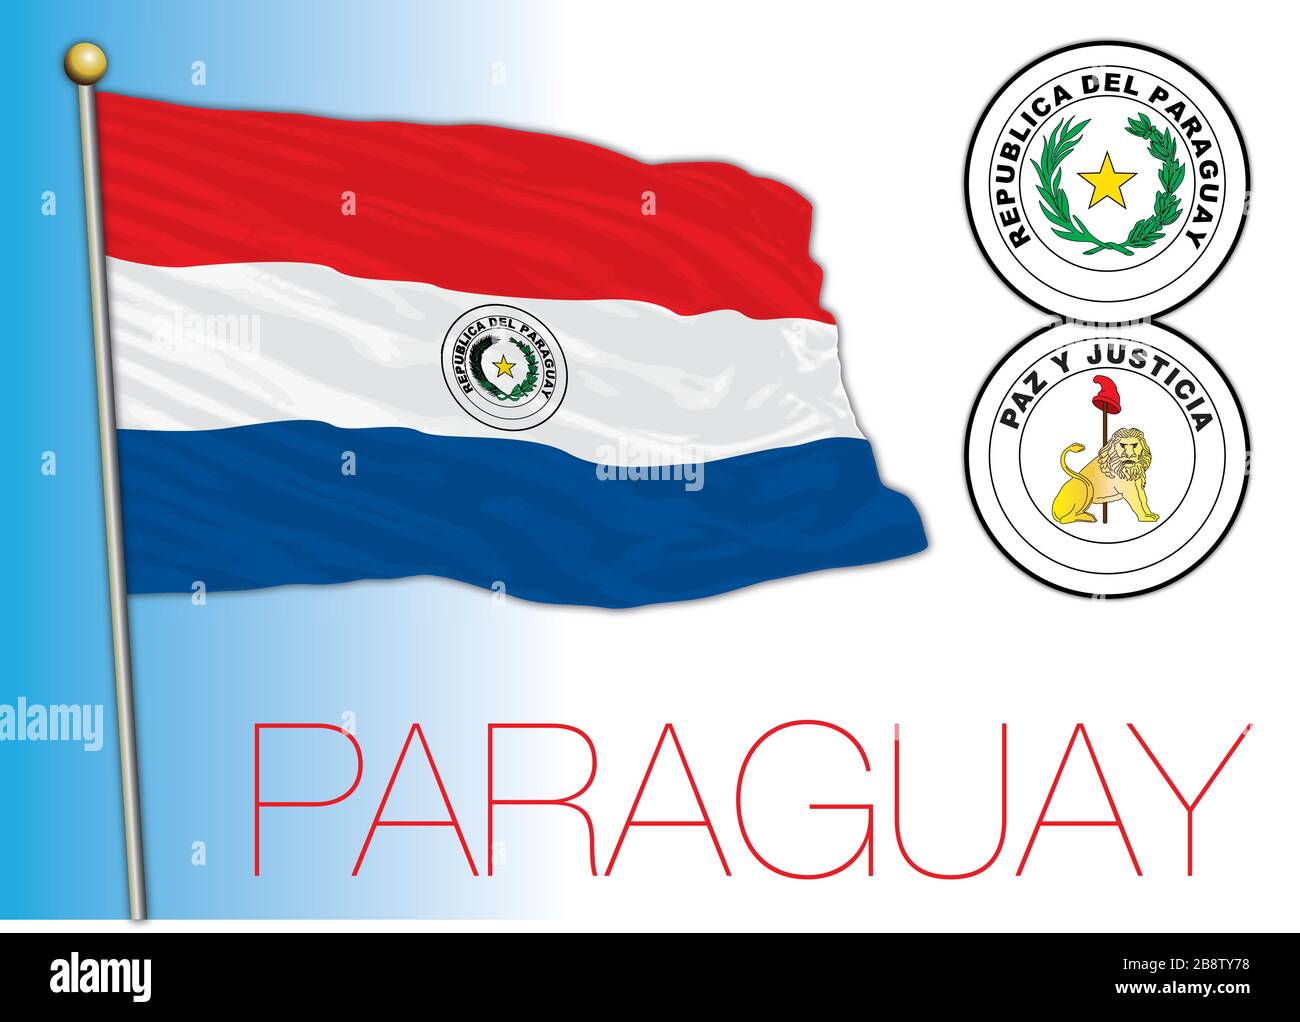 Paraguay official national flag and coat of arms, south america, vector illustration Stock Vector